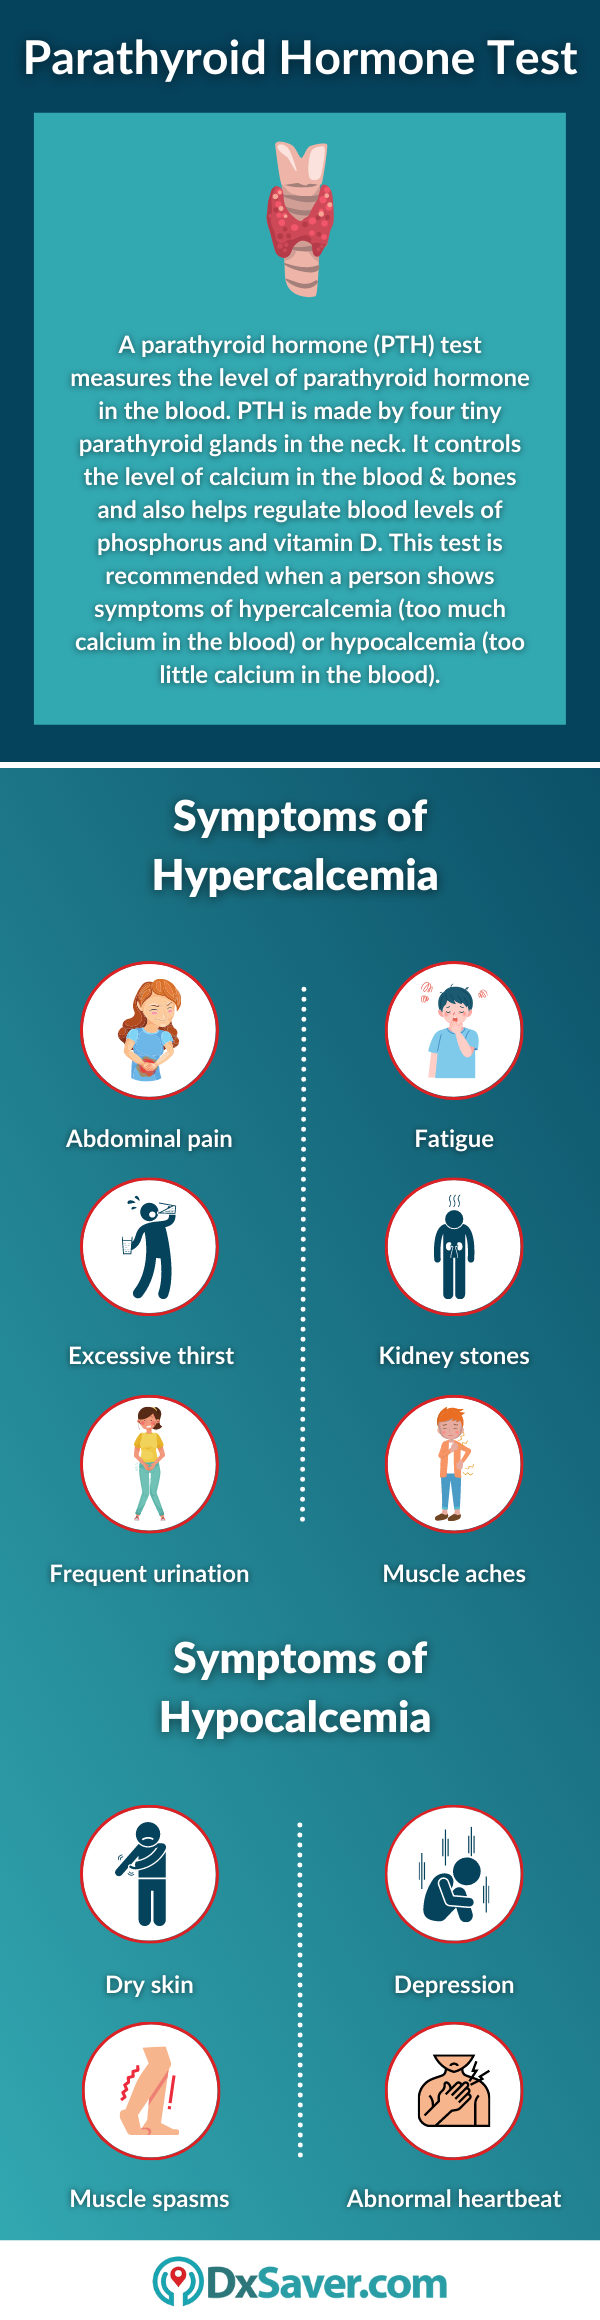 Parathyroid Hormone Test & Symptoms of Hypercalcemia and Hypocalcemia